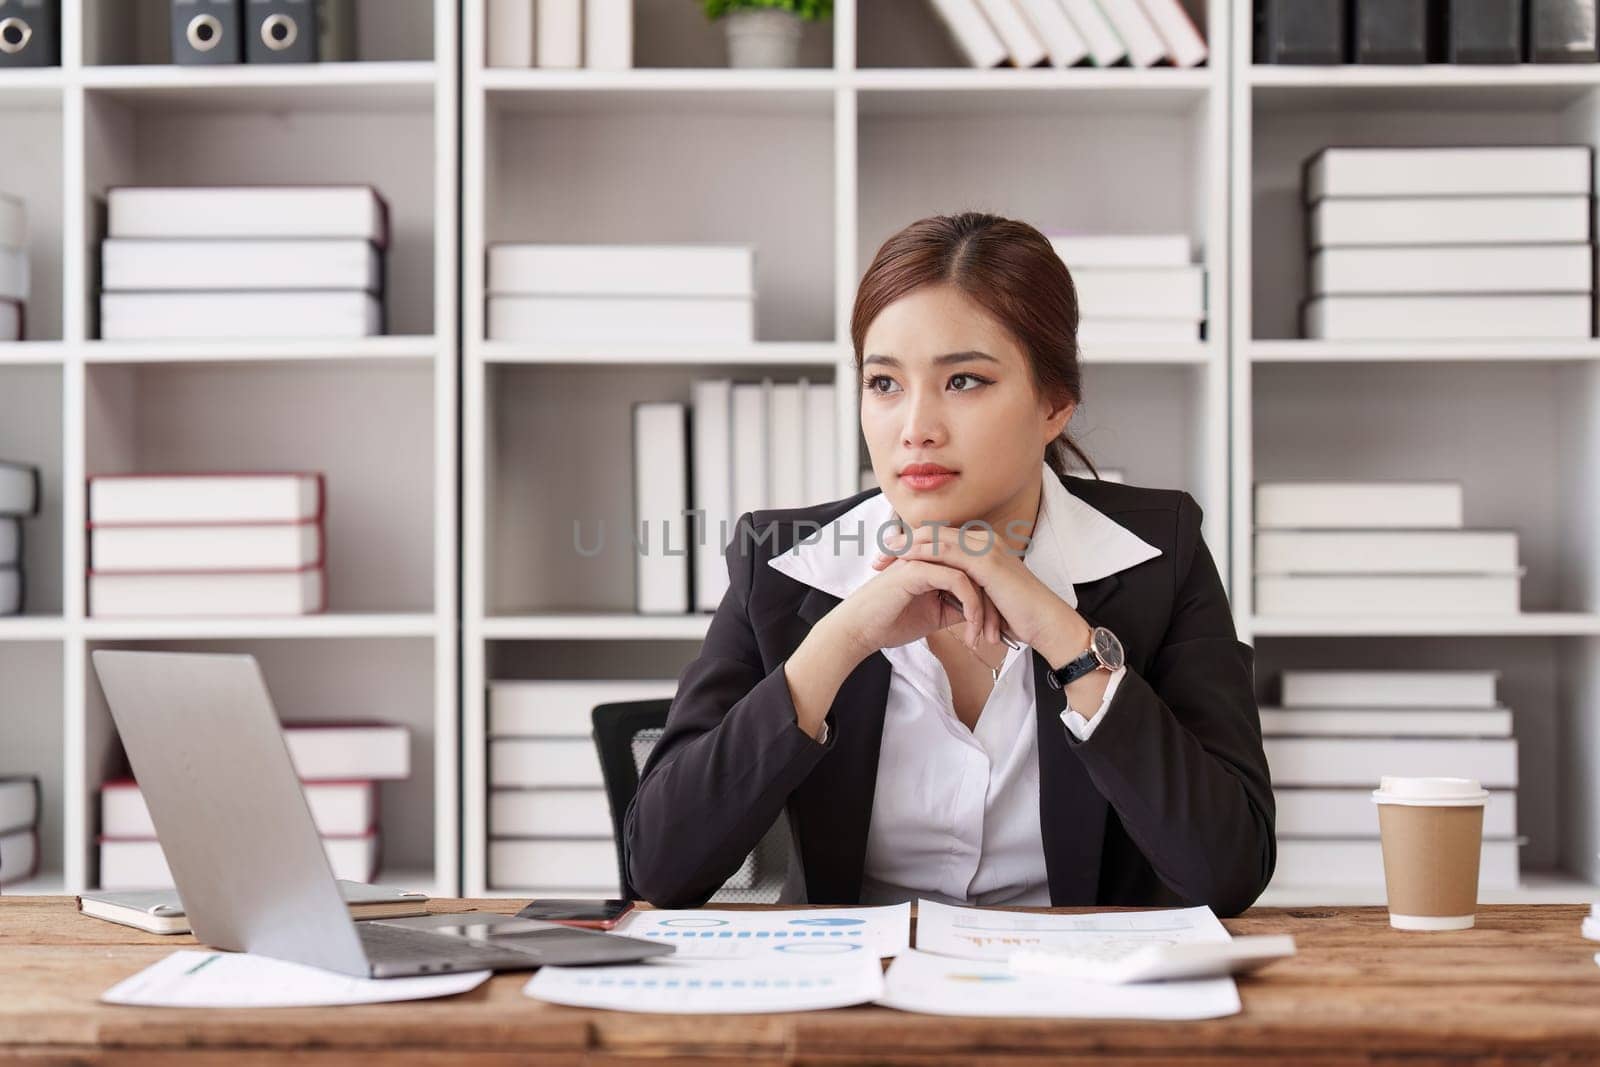 Employee feeling tired stressed with her work in the office, sad working woman overworked overtime, business woman upset with financial document.